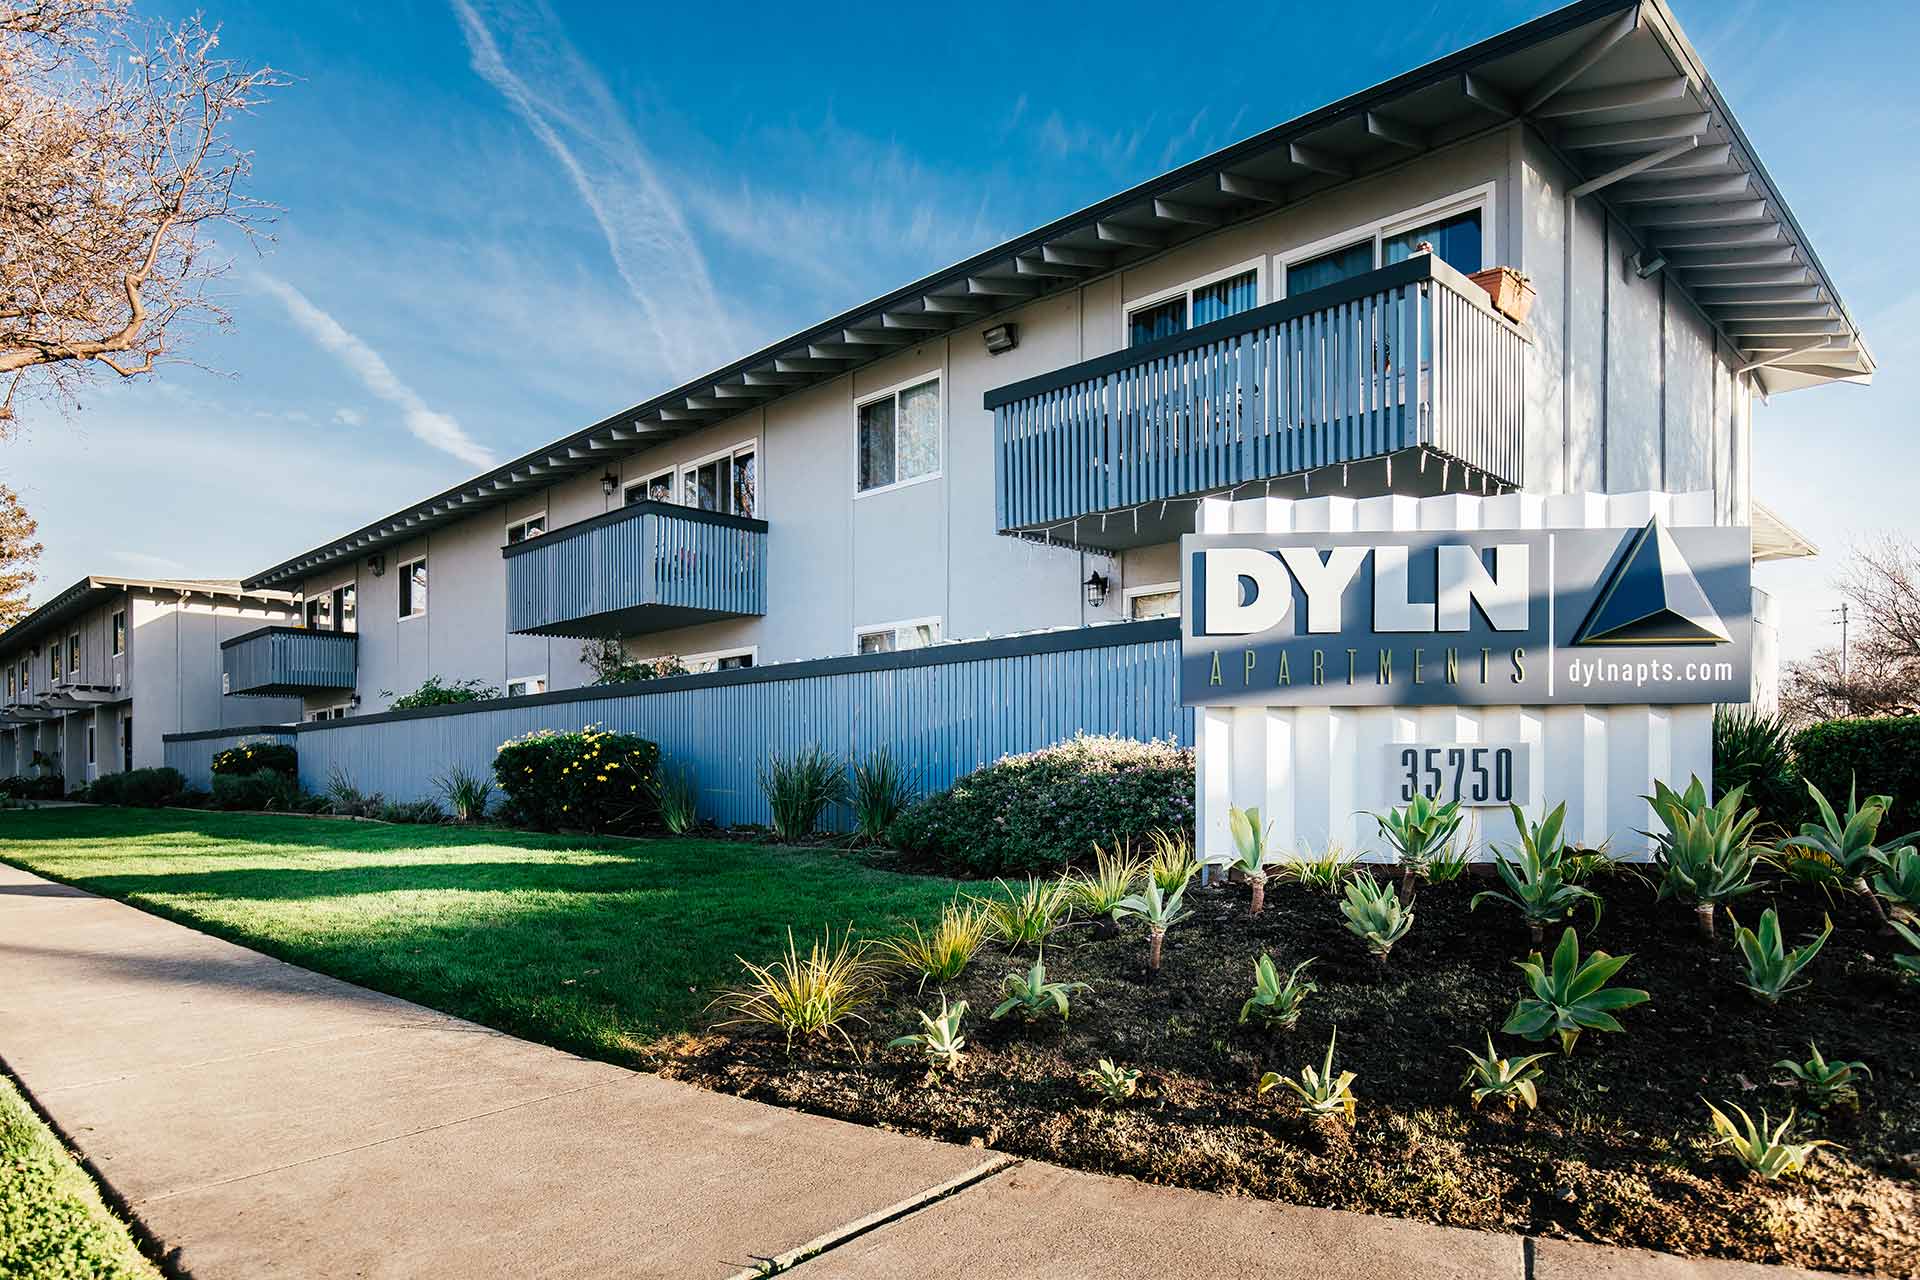 DYLN Apartments - Marquee